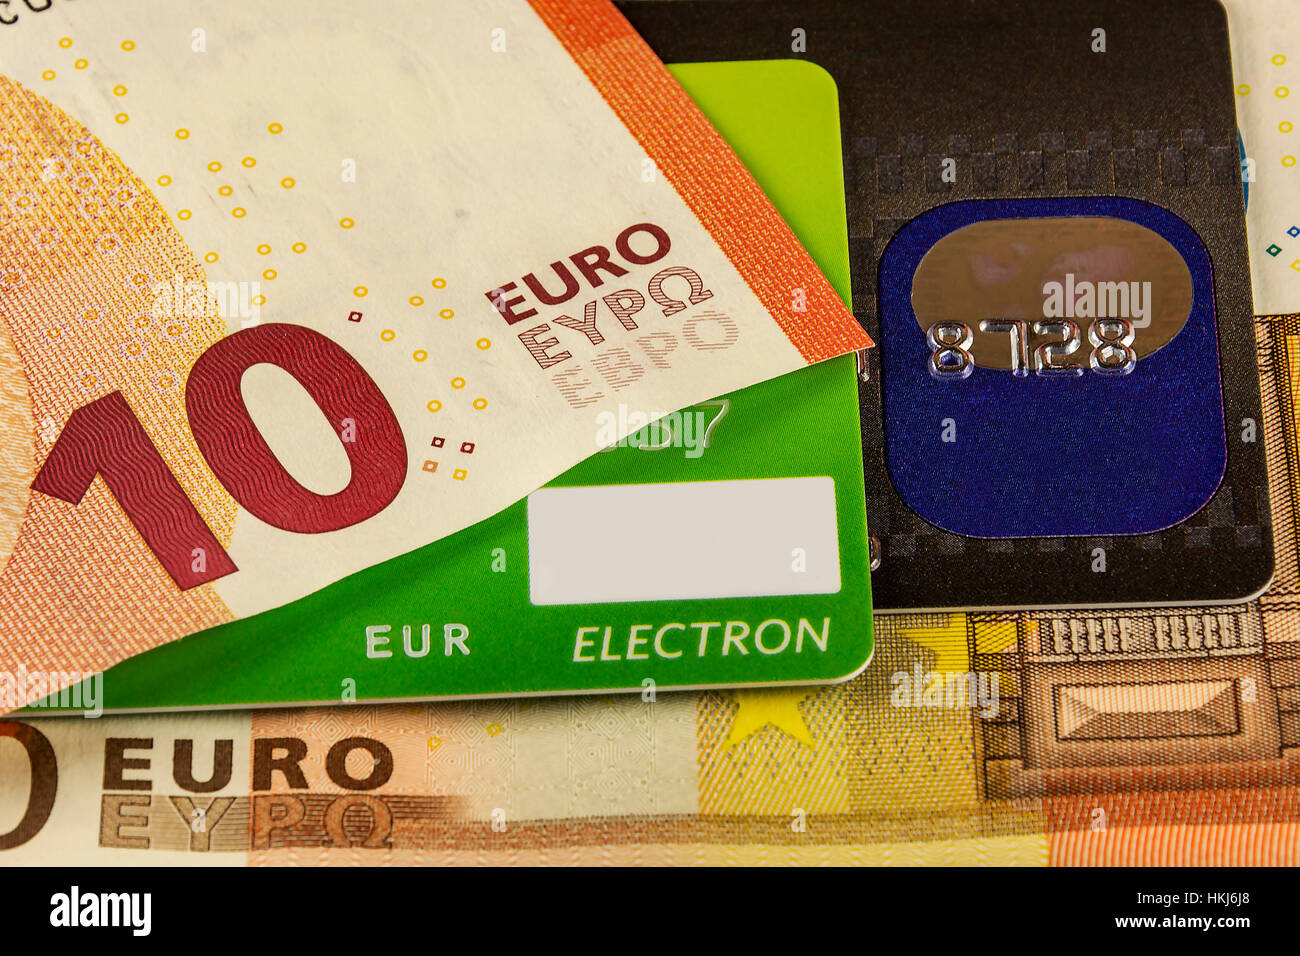 Part of the bank card cashless payment systems and parts of the euro banknotes Stock Photo